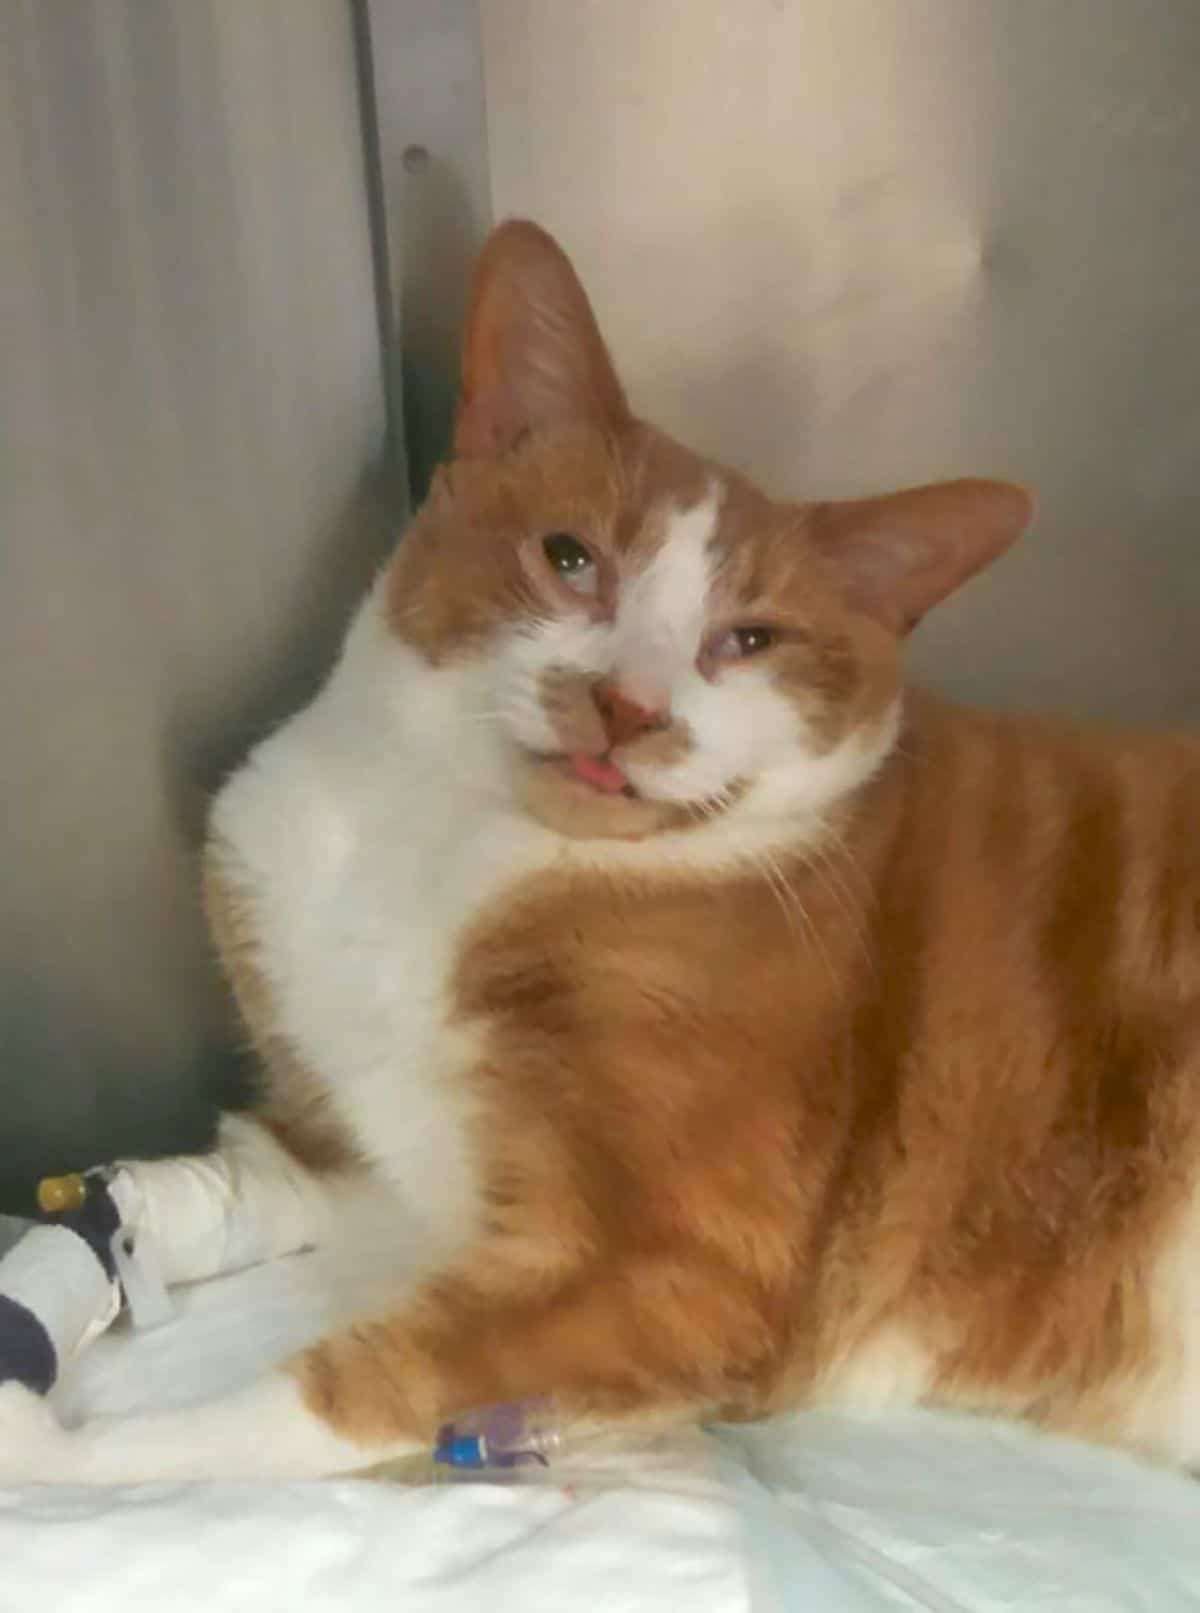 orange and white cat with tongue sticking out and eyes looking to either side